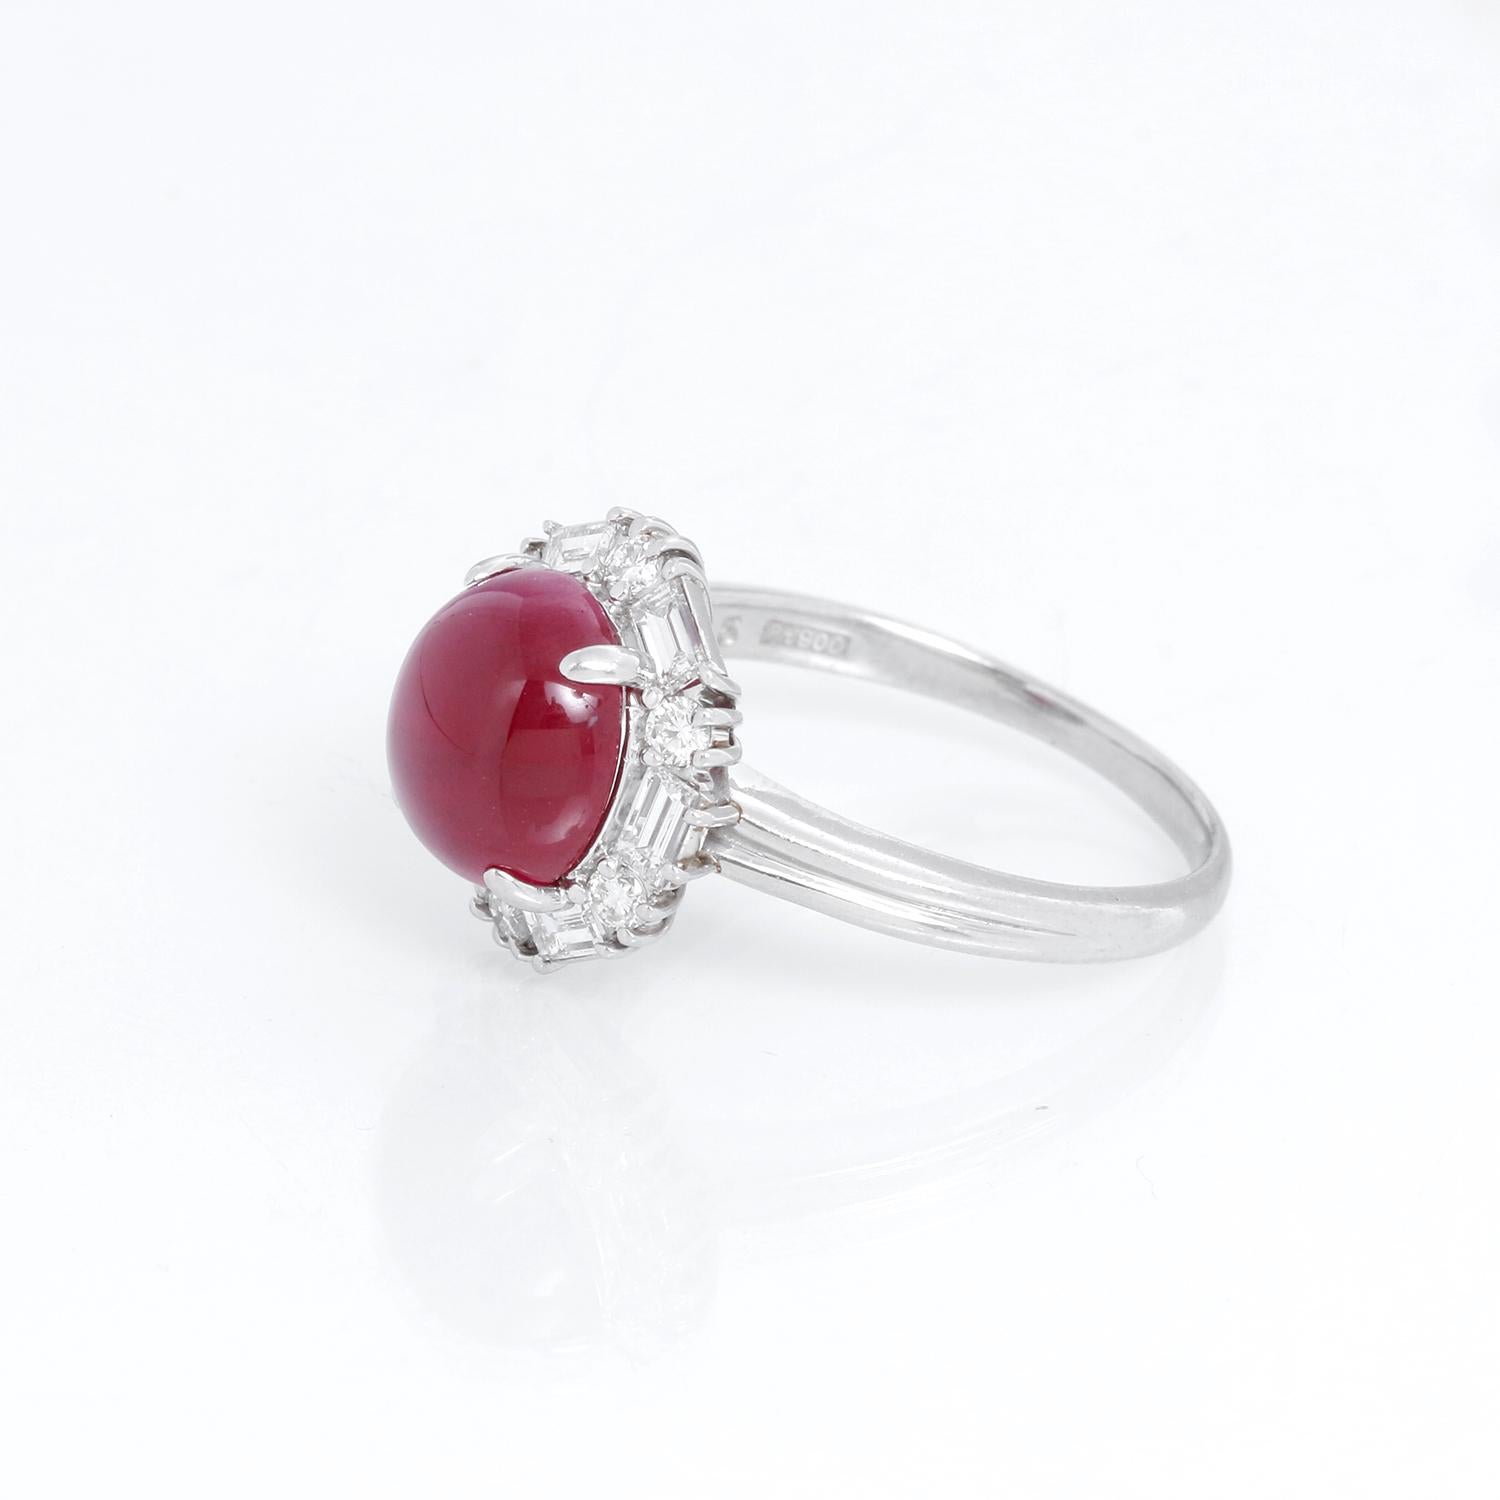 Ruby & Diamond Platinum Ring Size 9 1/4 - Cabochon Ruby weighing is 5.15 cts.  Two type of diamond cuts, first baguette and round brilliant cut diamonds weighing .93 cts. Can be sized. Pre-owned with DeMesy ring box.